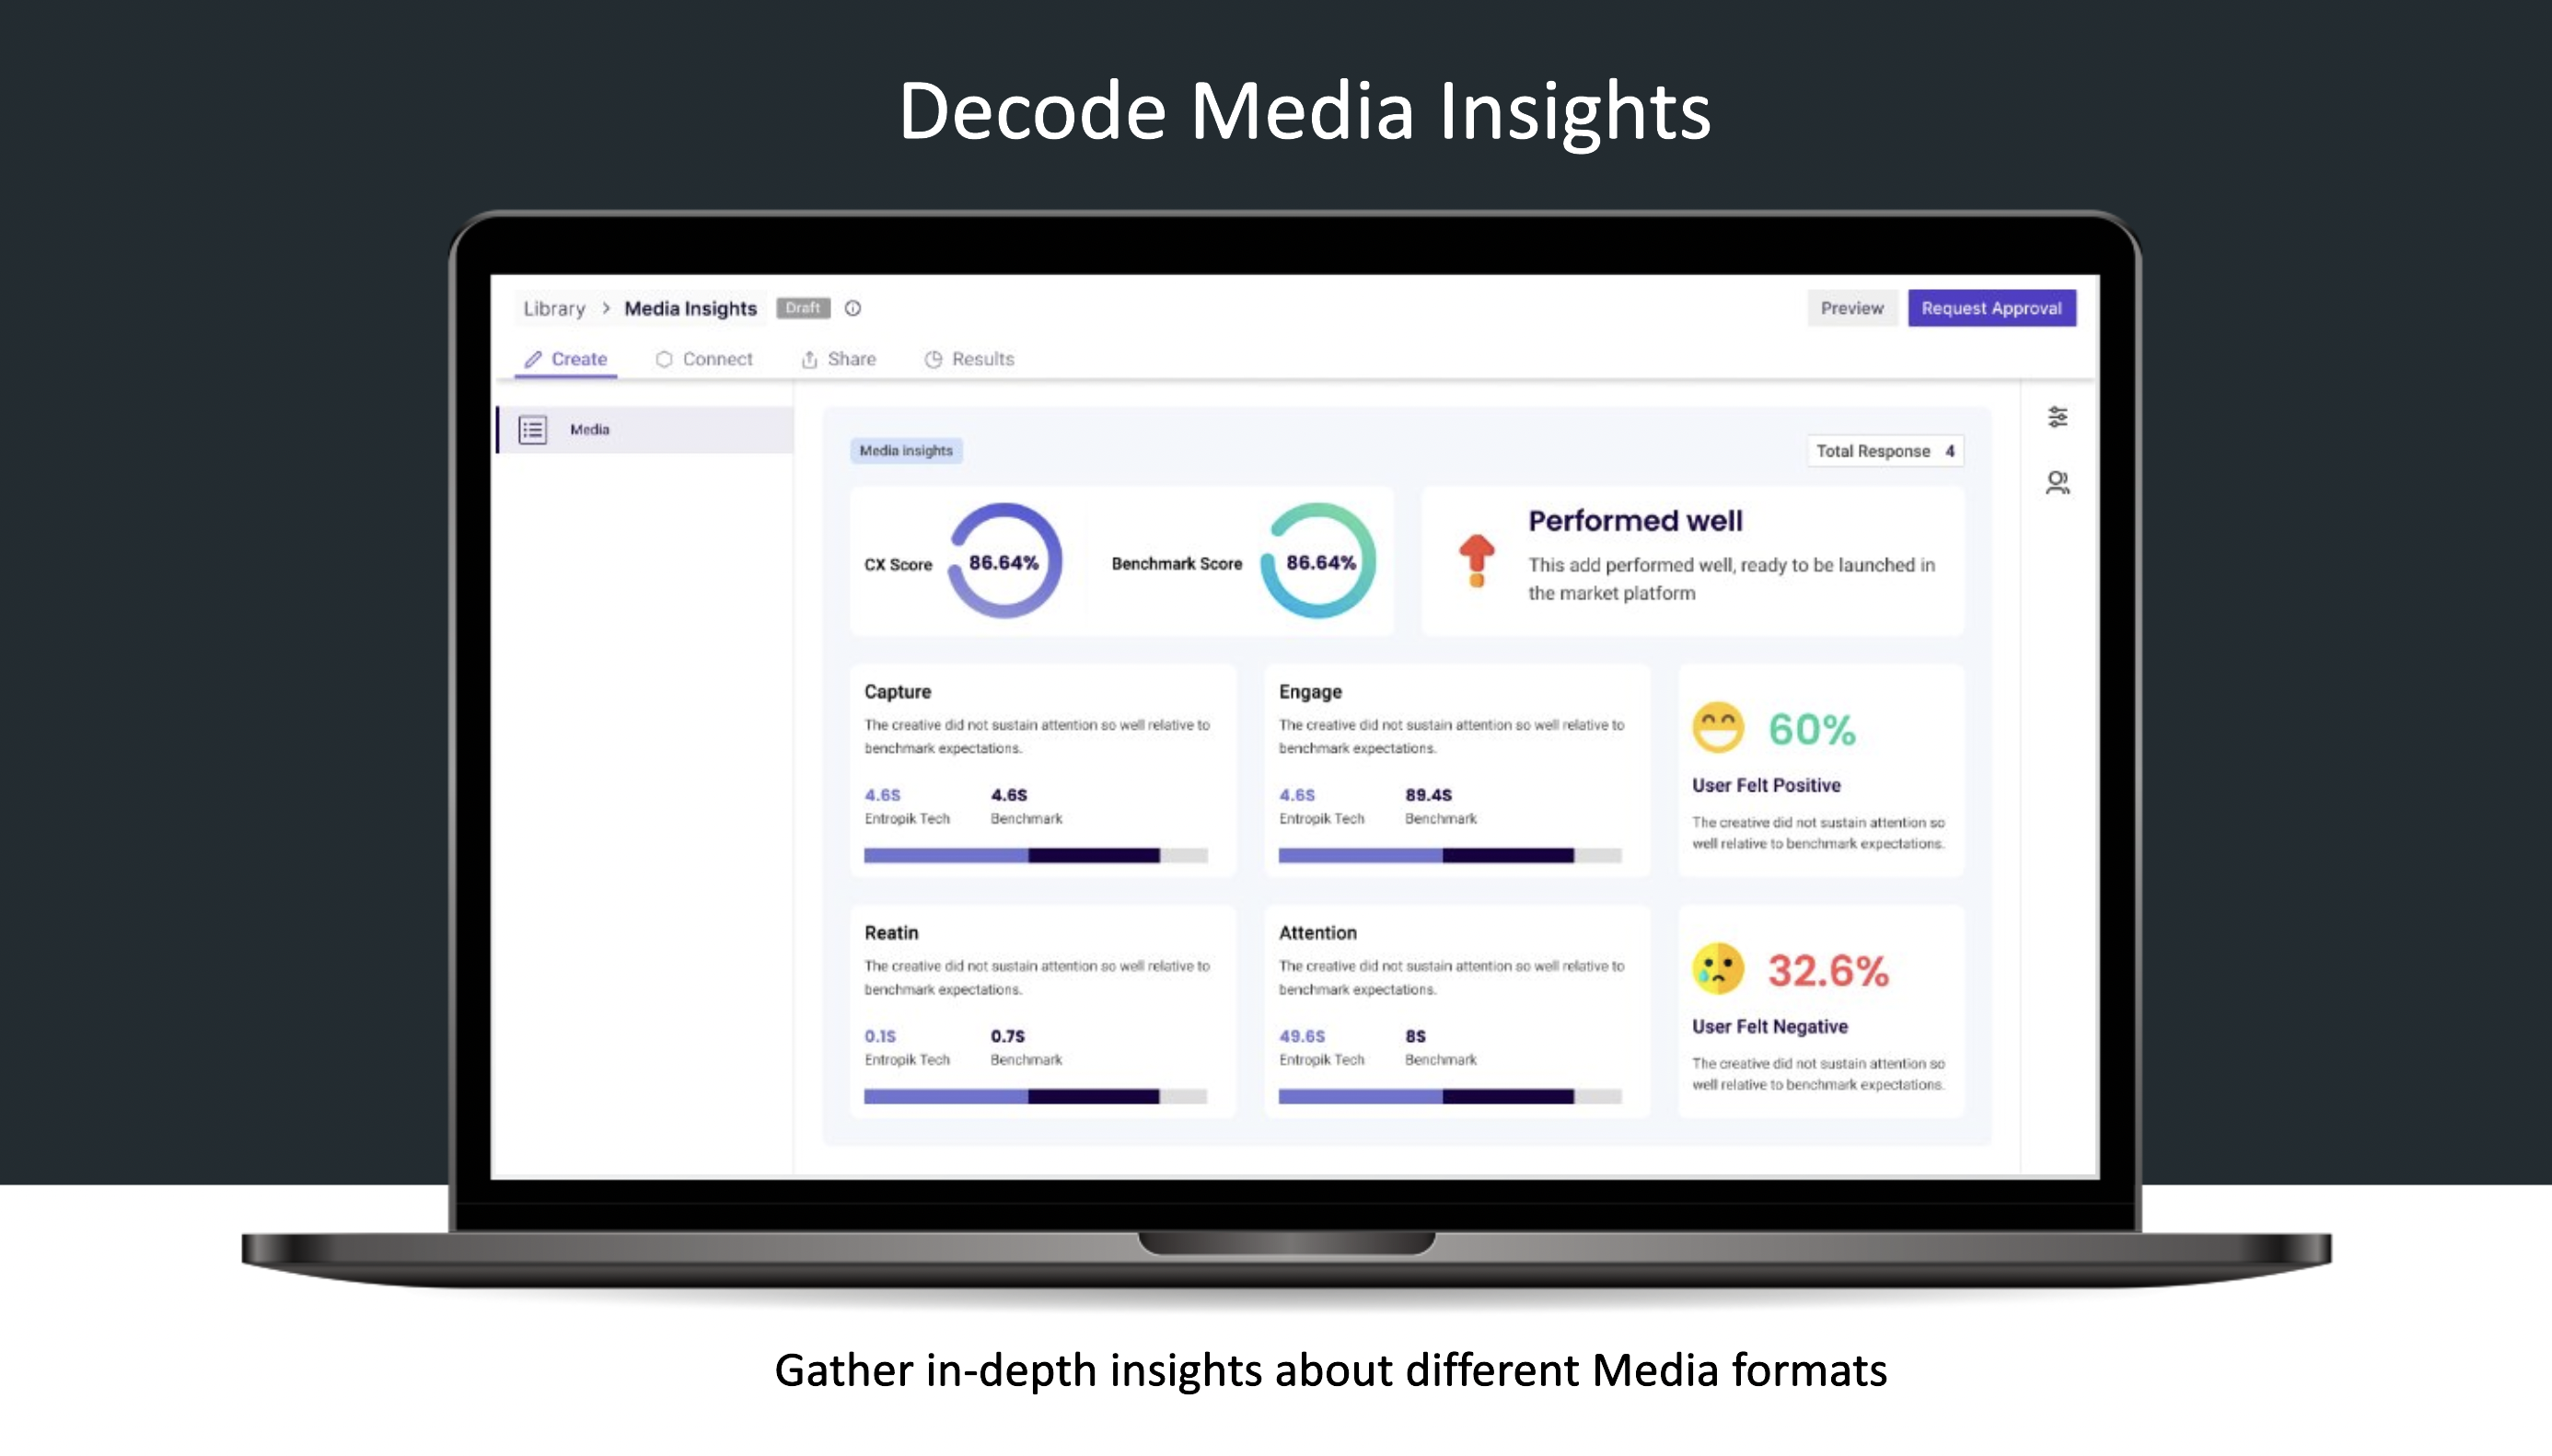 Gather in-depth insights about different Media formats with CX Scores, Benchmarking and Emotional Response ​